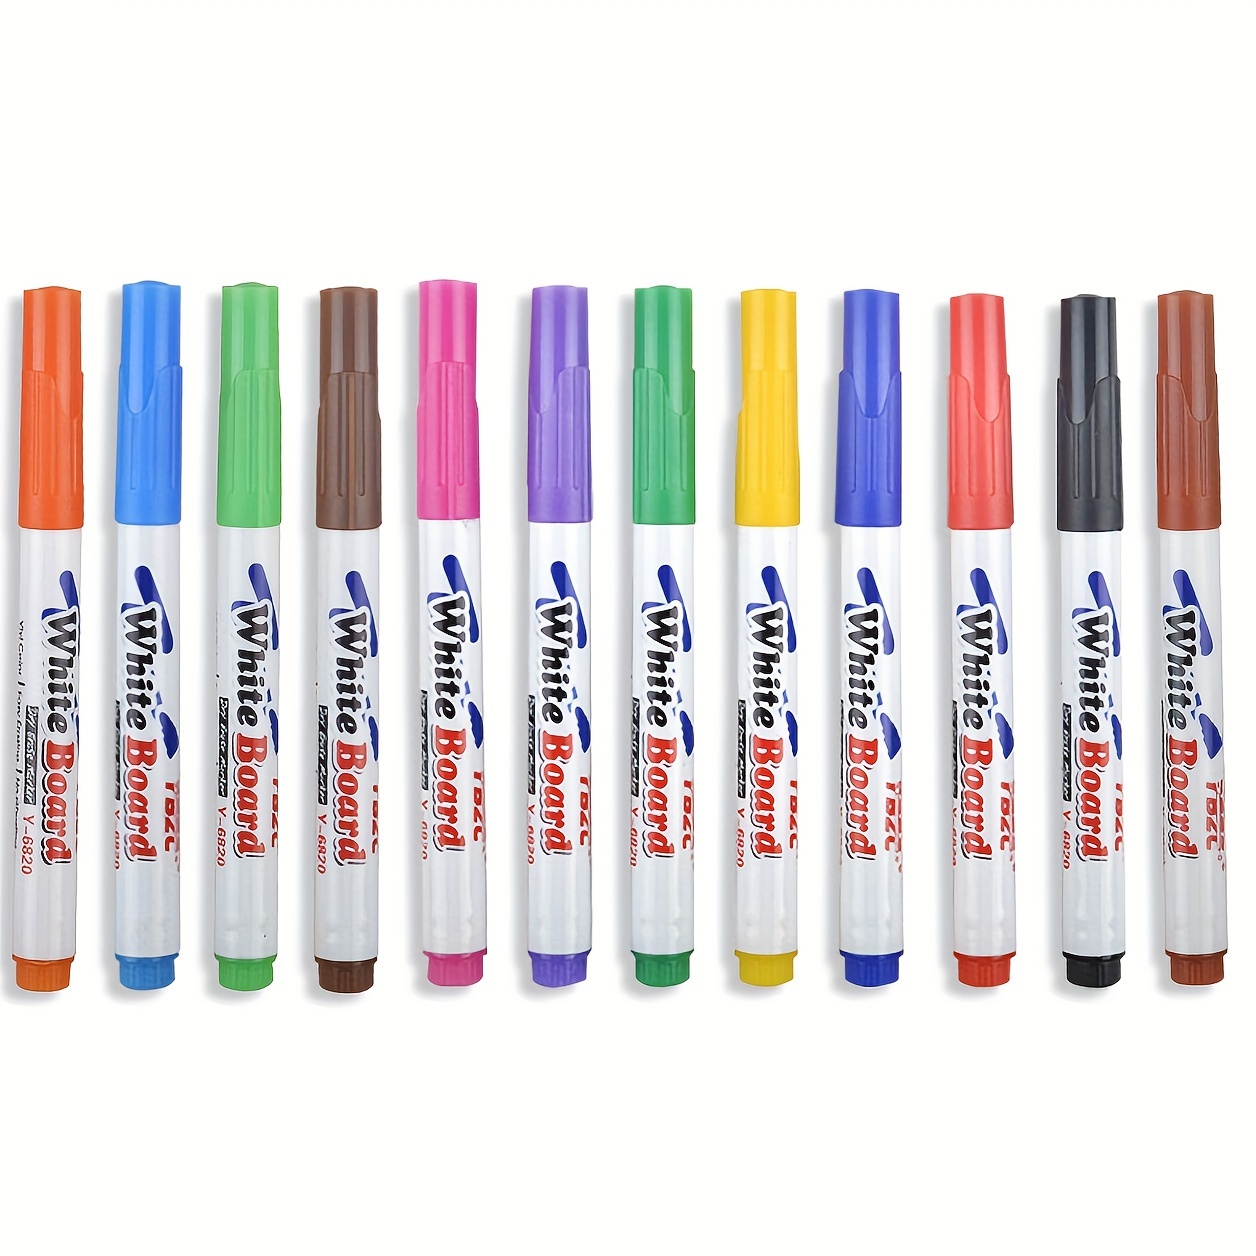 Erasable Water-Based Whiteboard Marker Pen Magical Water Painting Pen Water Doodle Pens Kids Drawing, Size: Type 2, Other